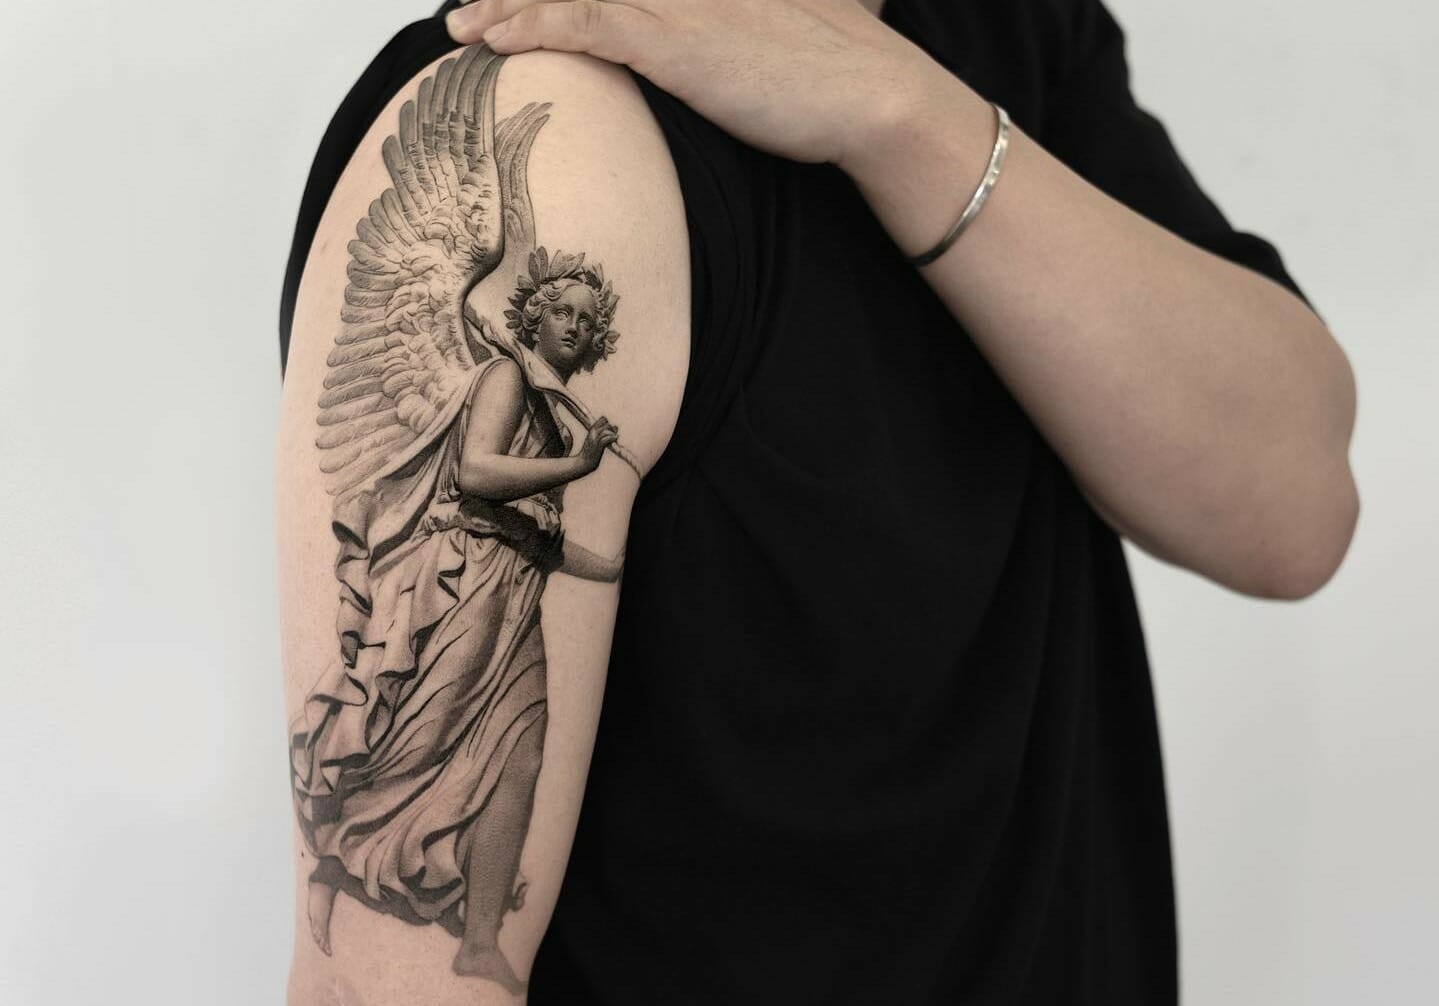 10 Best Angel Statue Tattoo Ideas That Will Blow Your Mind!

+2023